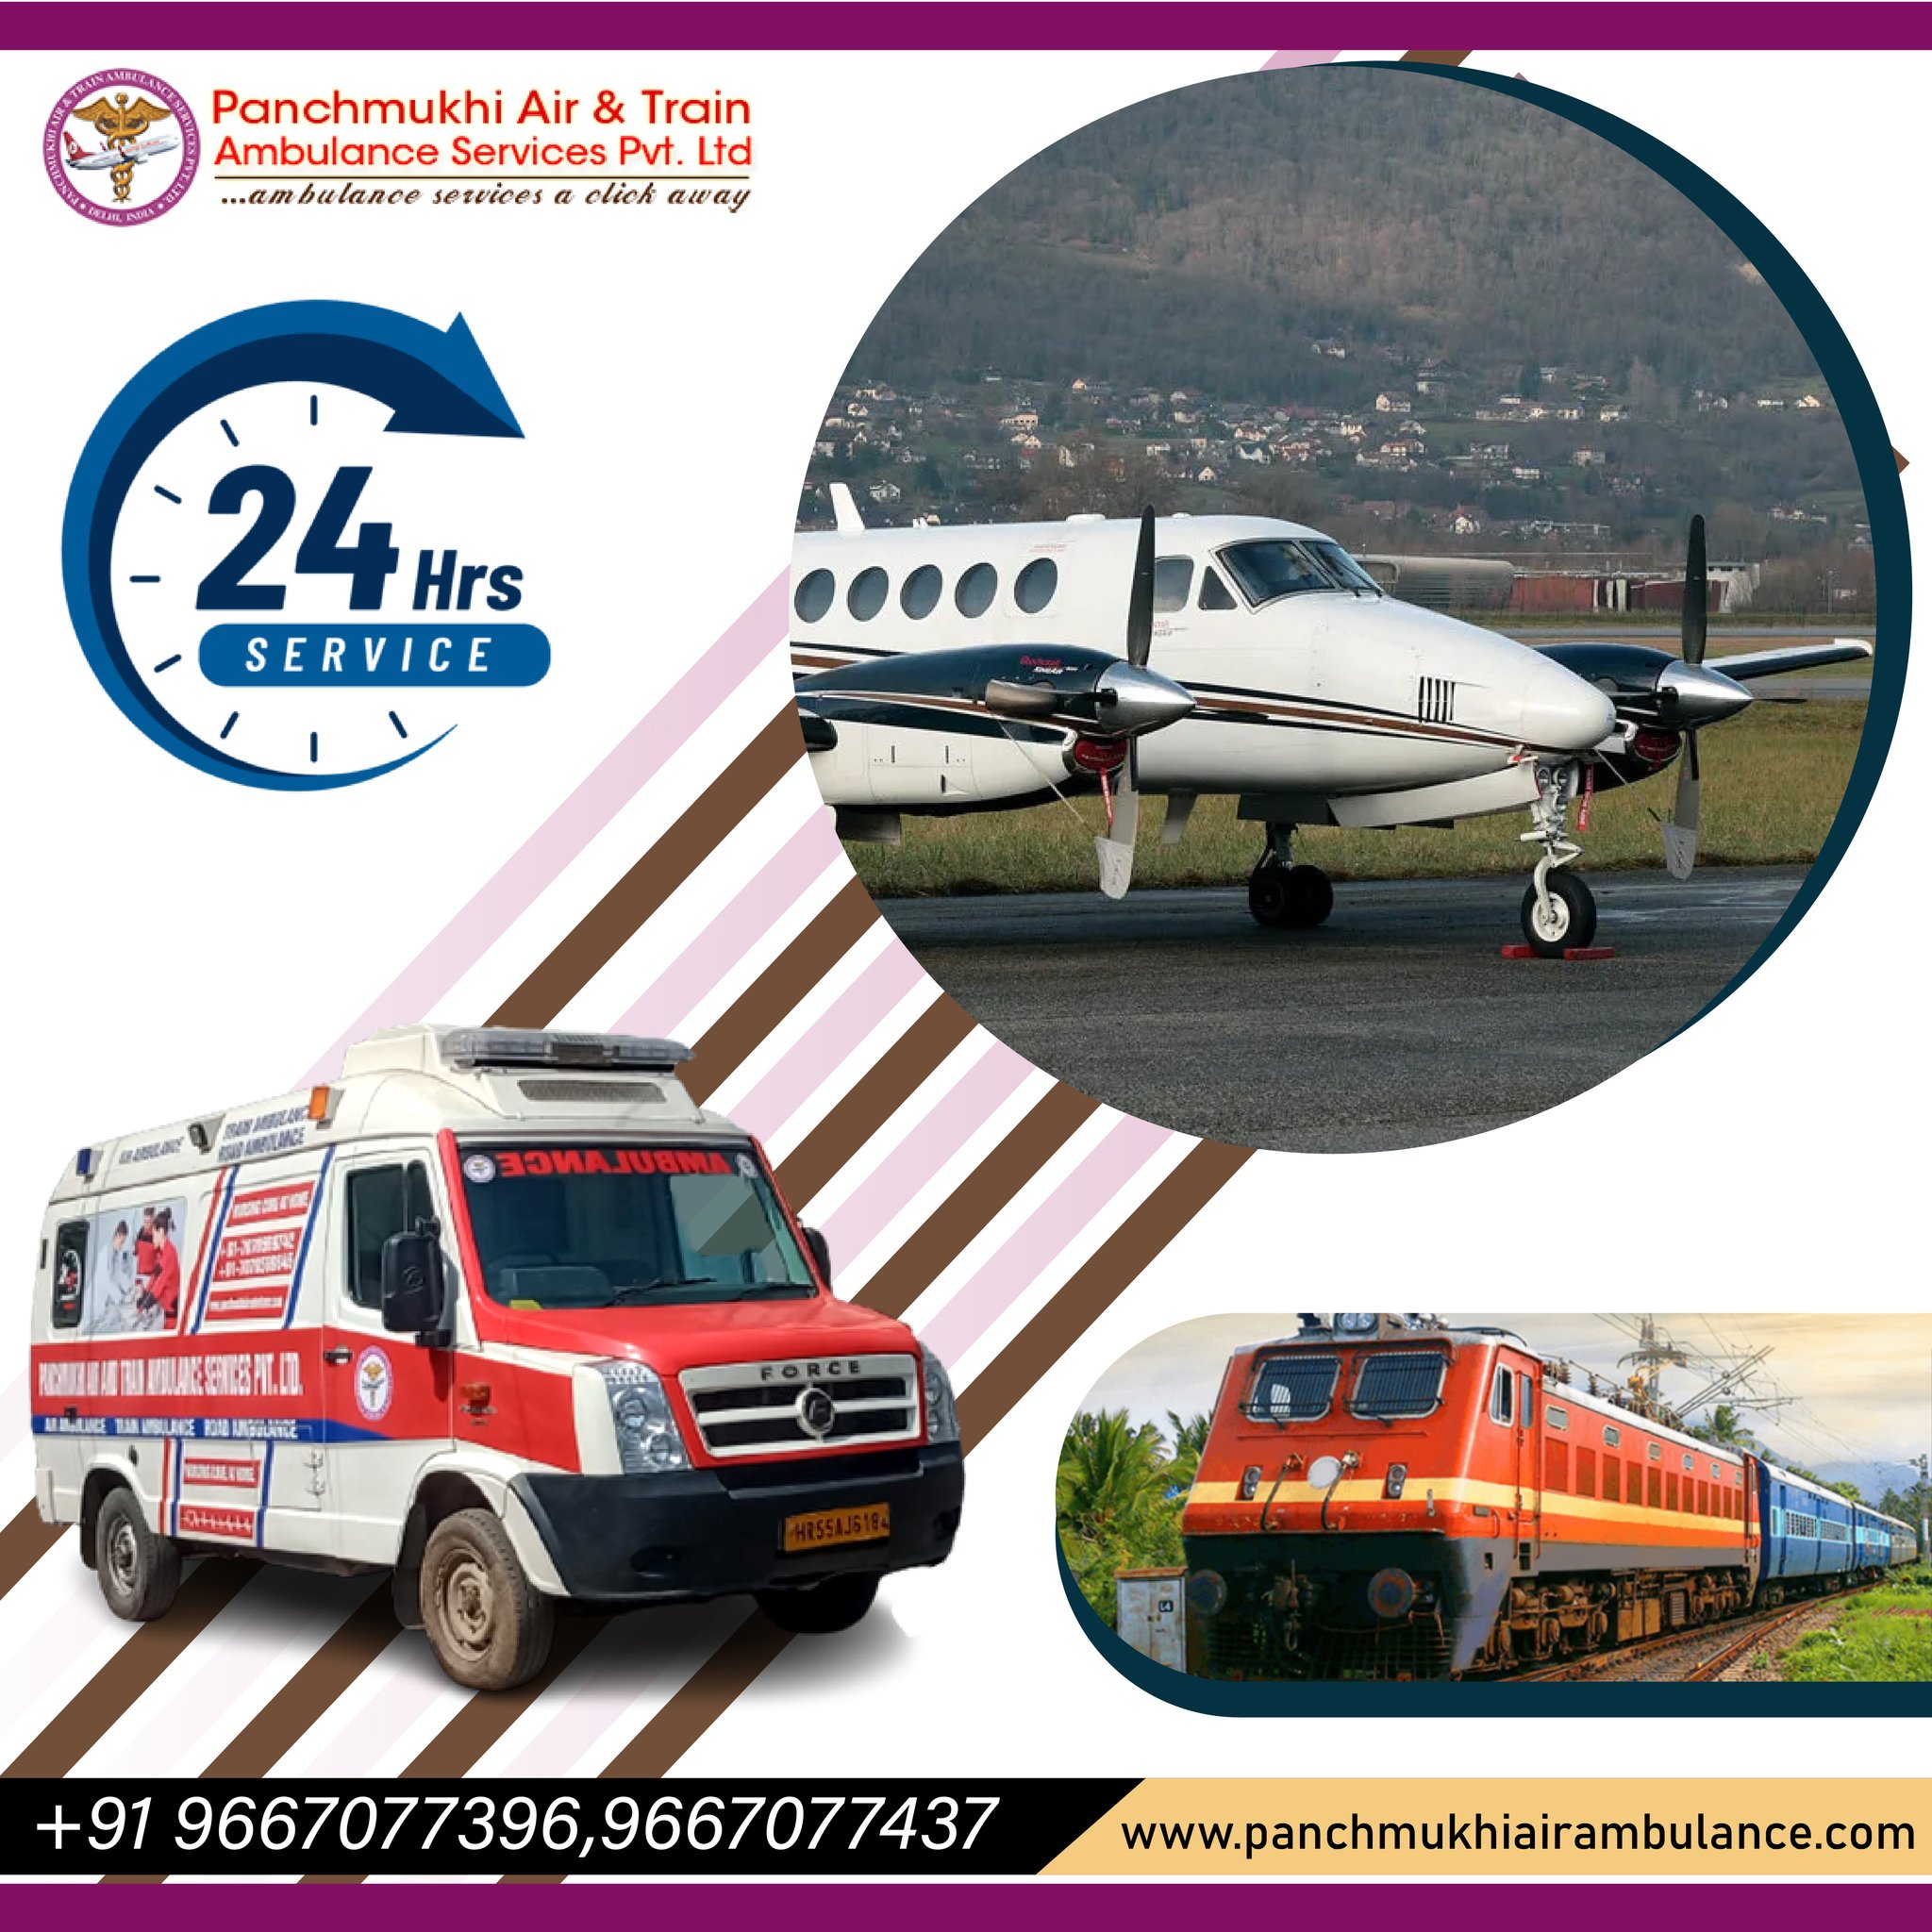 Panchmukhi Air Ambulance Service in Ranchi Offers Top-Notch Air Ambulance Services